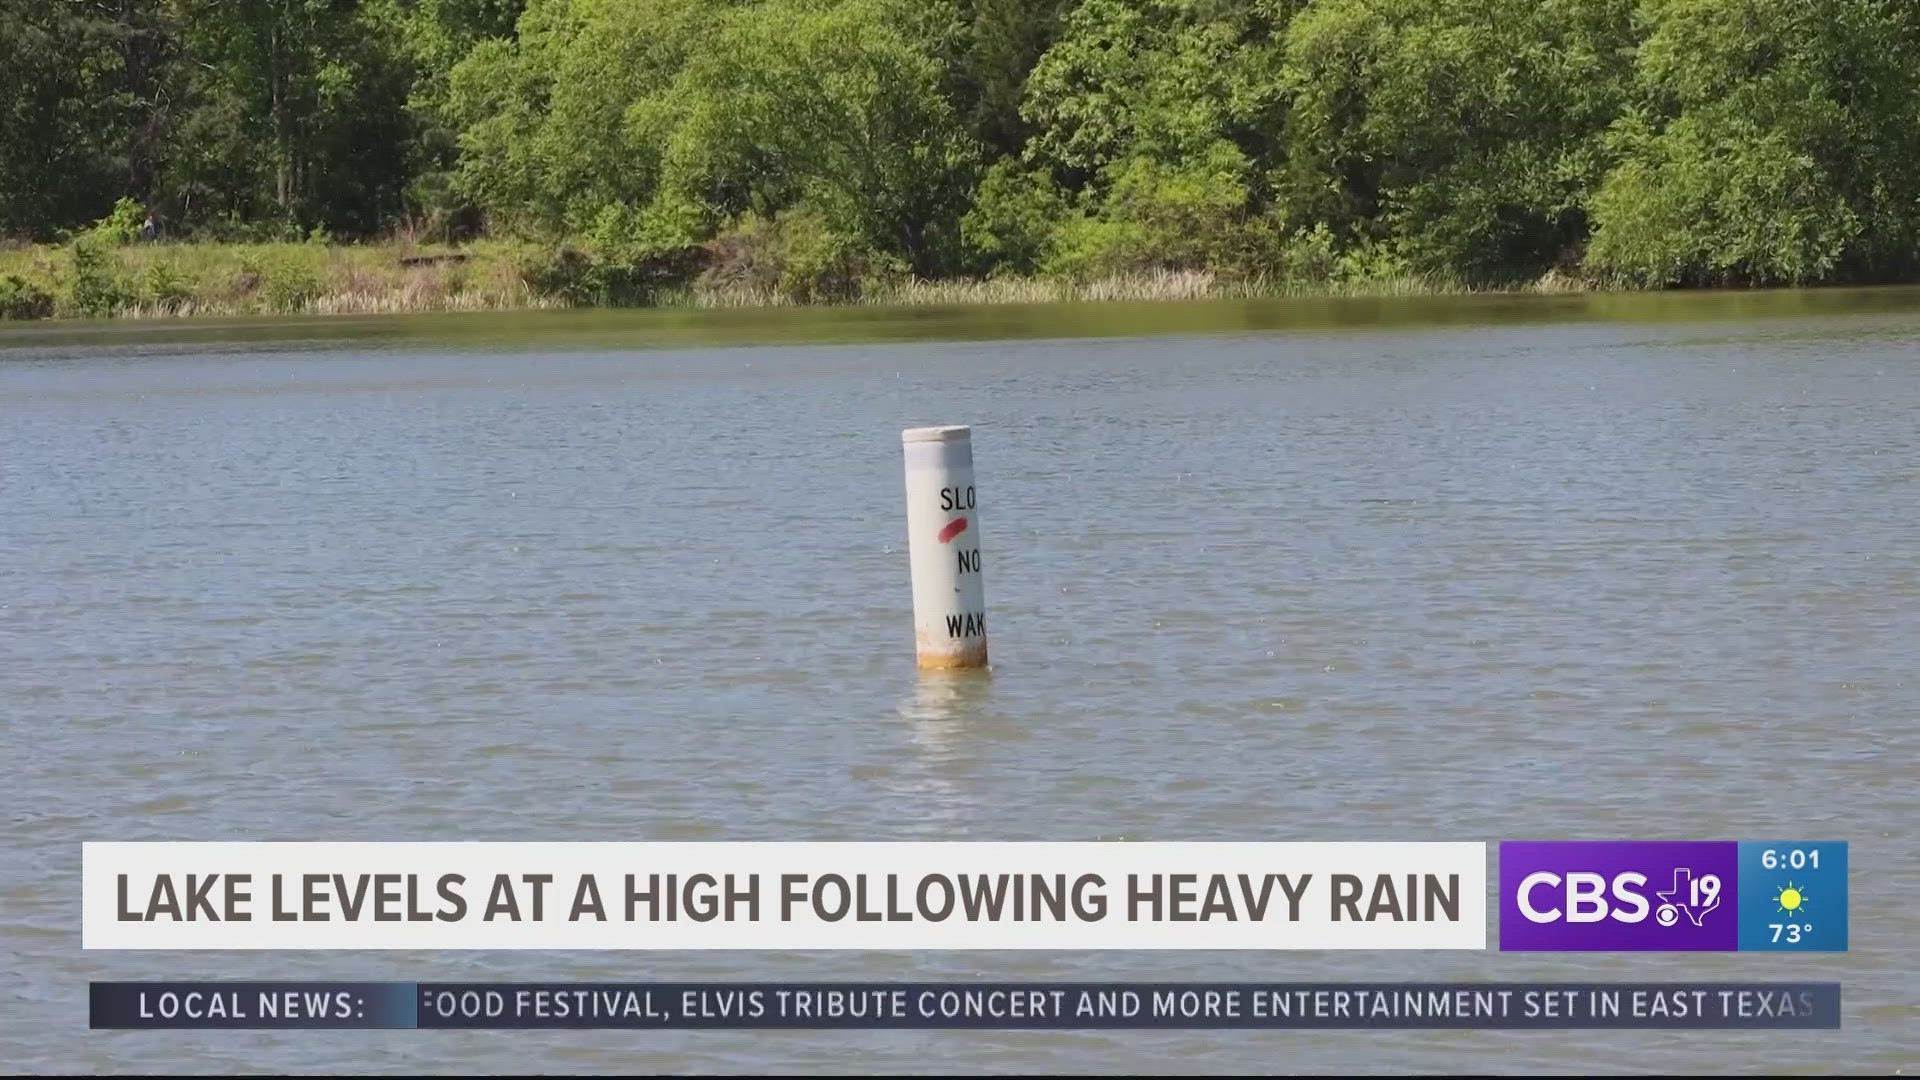 Lake levels in East Texas have risen following the heavy rain many areas experienced this week.